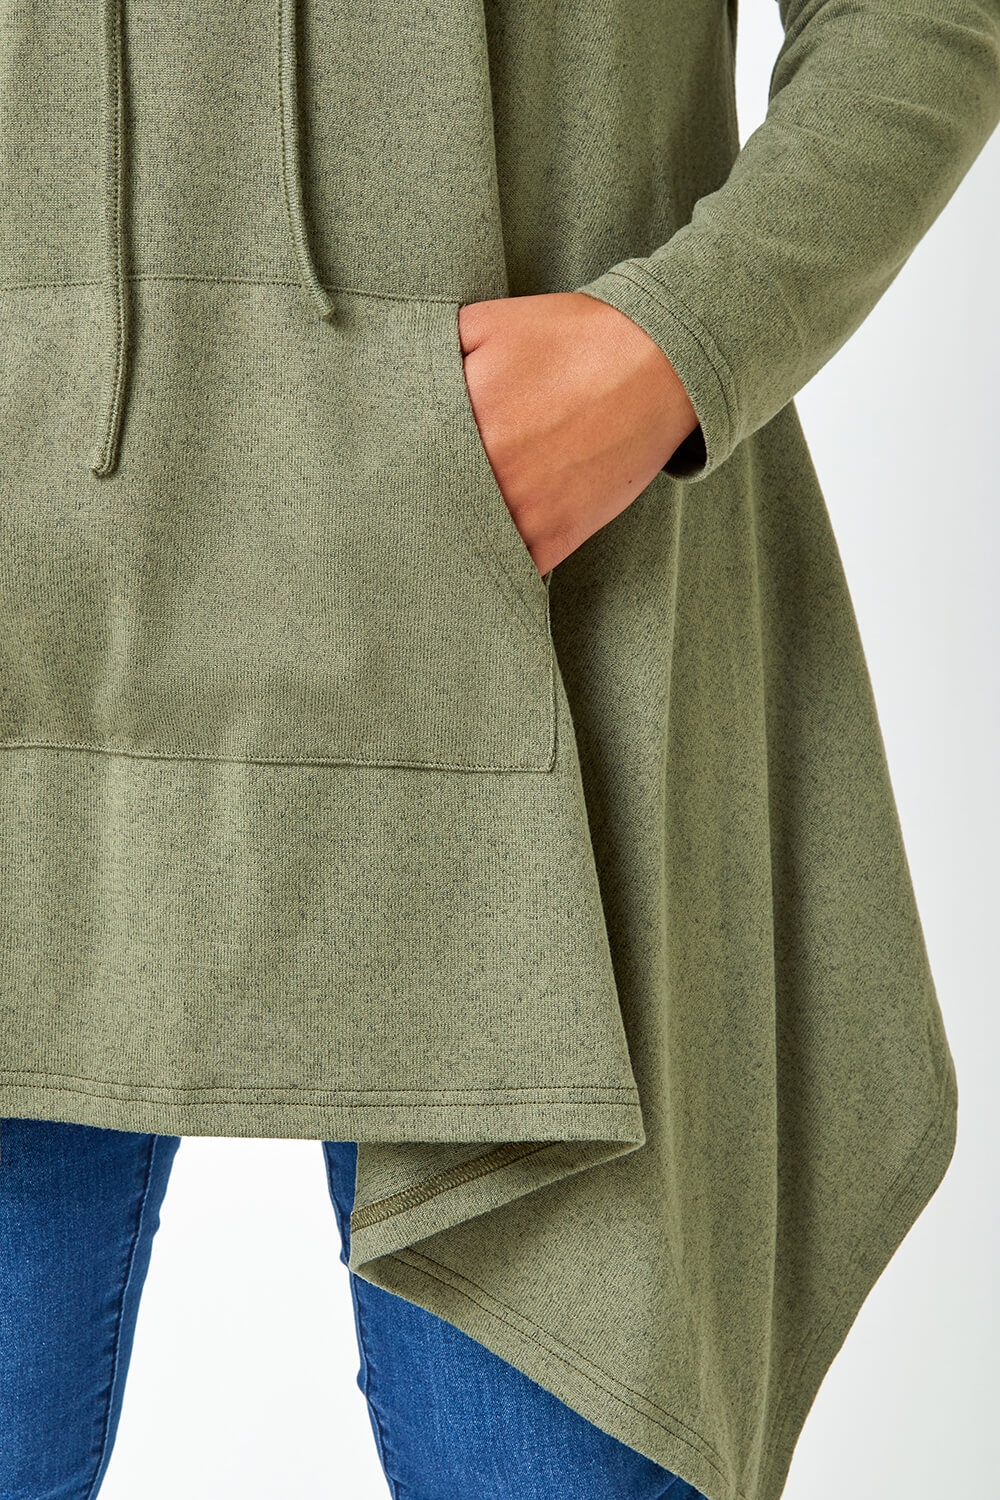 KHAKI Curve Cowl Neck Relaxed Stretch Top, Image 5 of 5